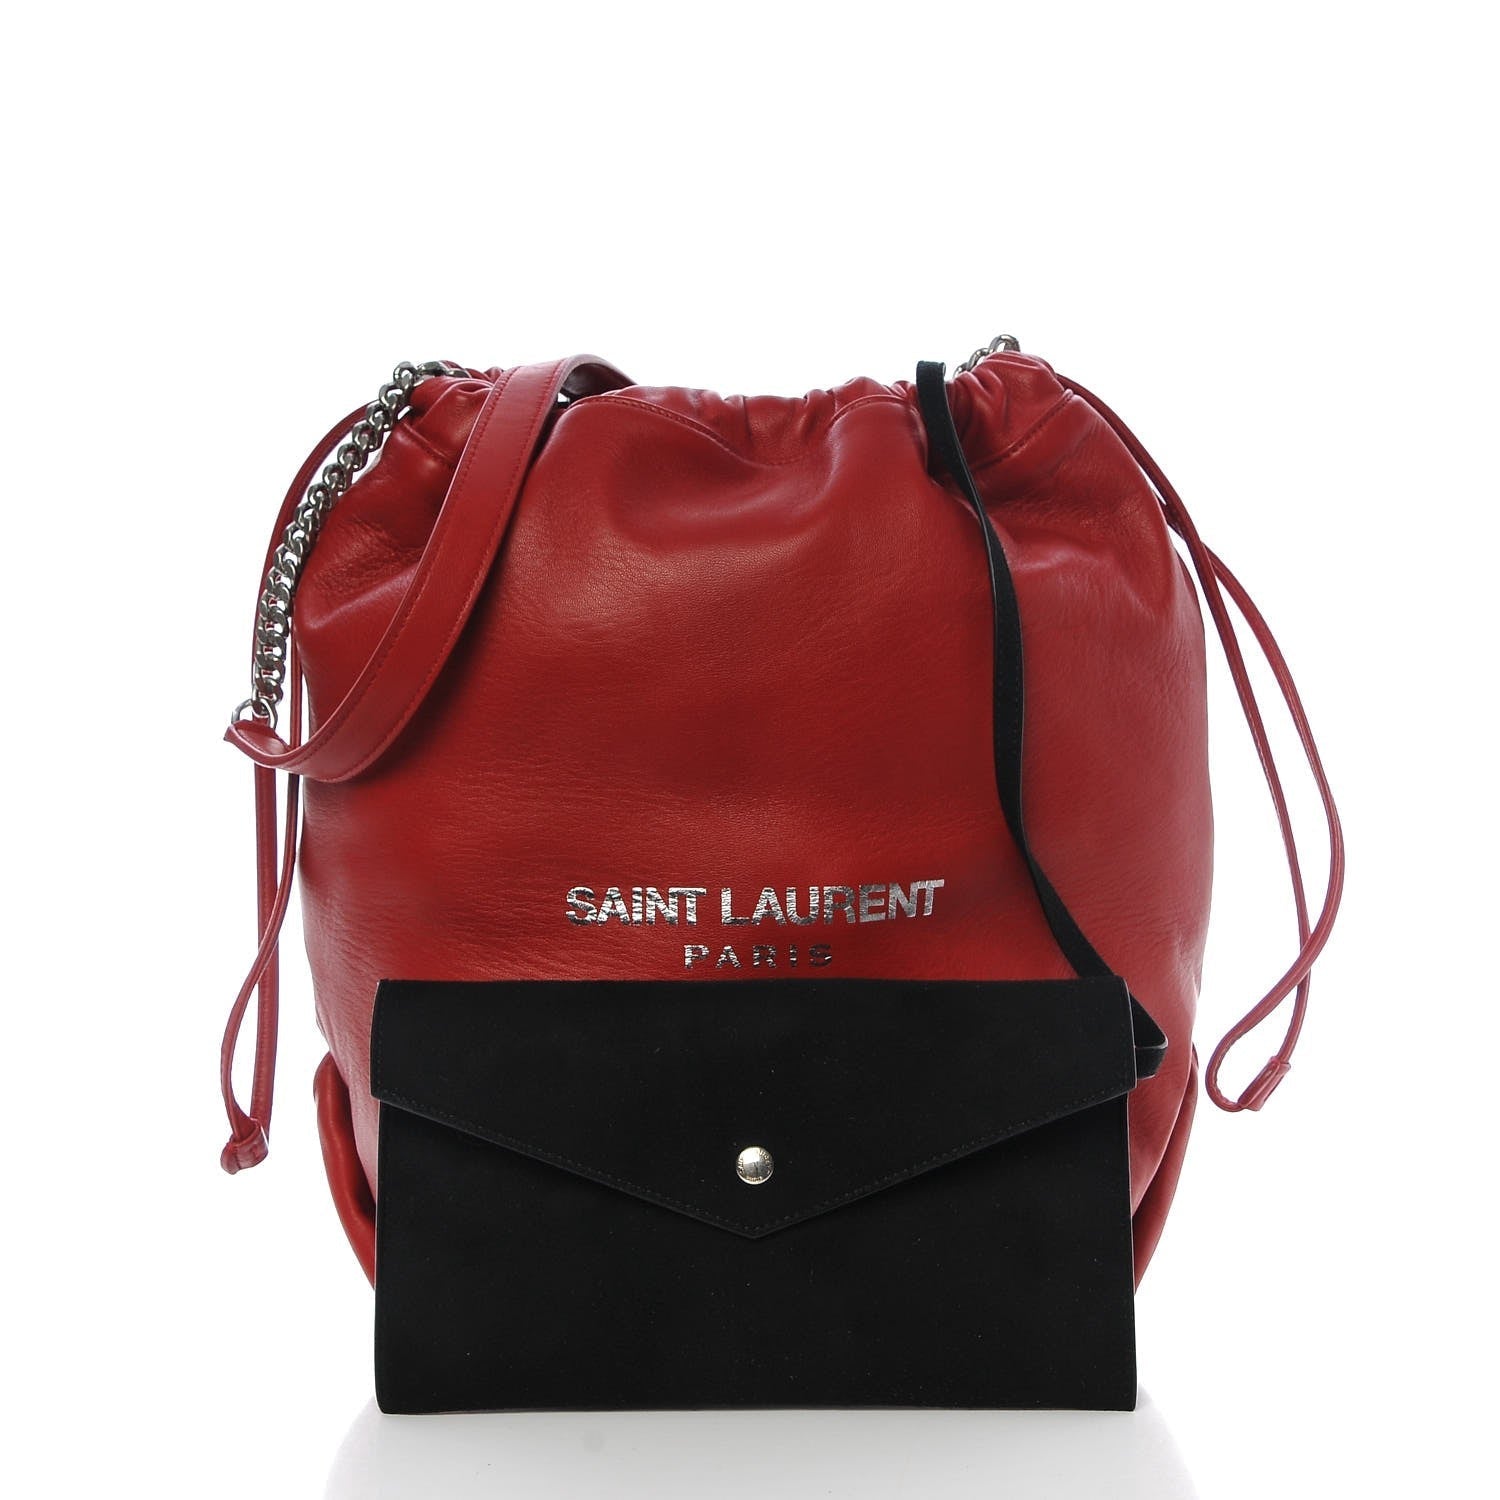 Saint Laurent Teddy Red Lambskin Leather Drawstring Bucket Bag 538447 at_Queen_Bee_of_Beverly_Hills